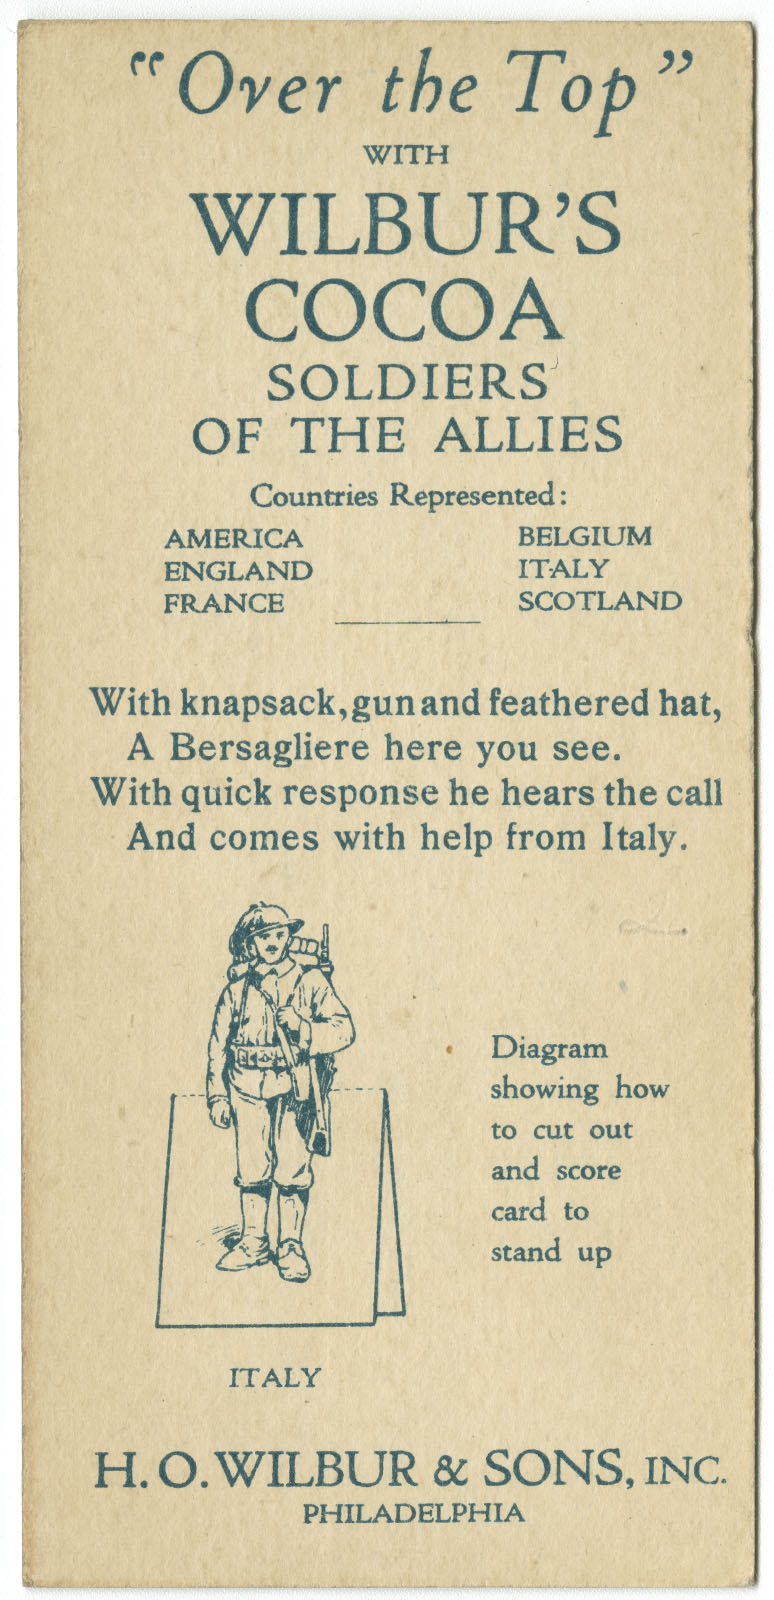 Soldiers of the Allies paper dolls. Color letterpress, ca. 1918.